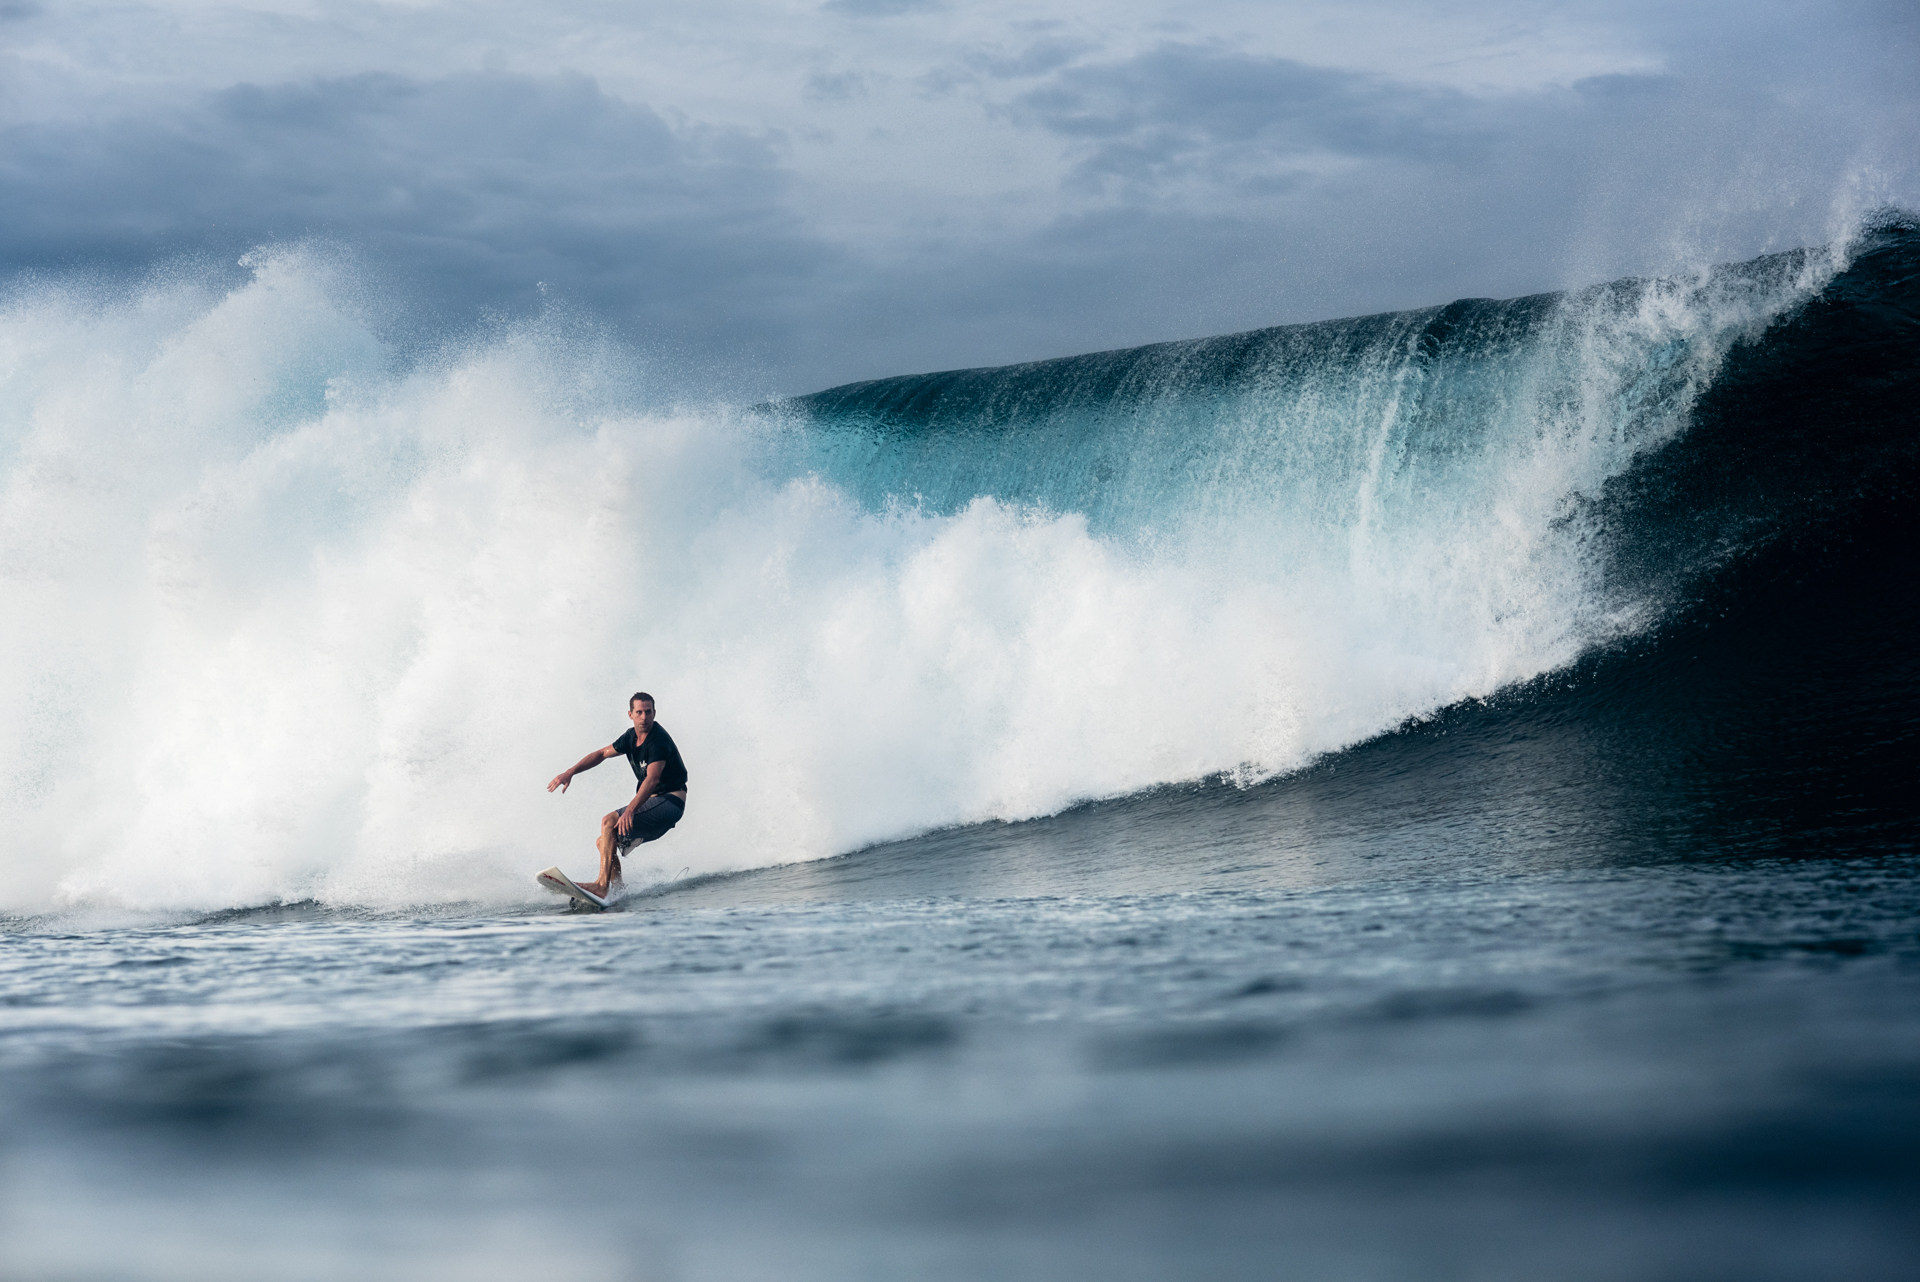 James O’Donnell surfs off Siargao in the Philippines, where he operates a resort for fellow fans of the sport. An entrepreneur, the Australian also has a factory in southern China making surf wear and streetwear. Photo: James O’Donnell